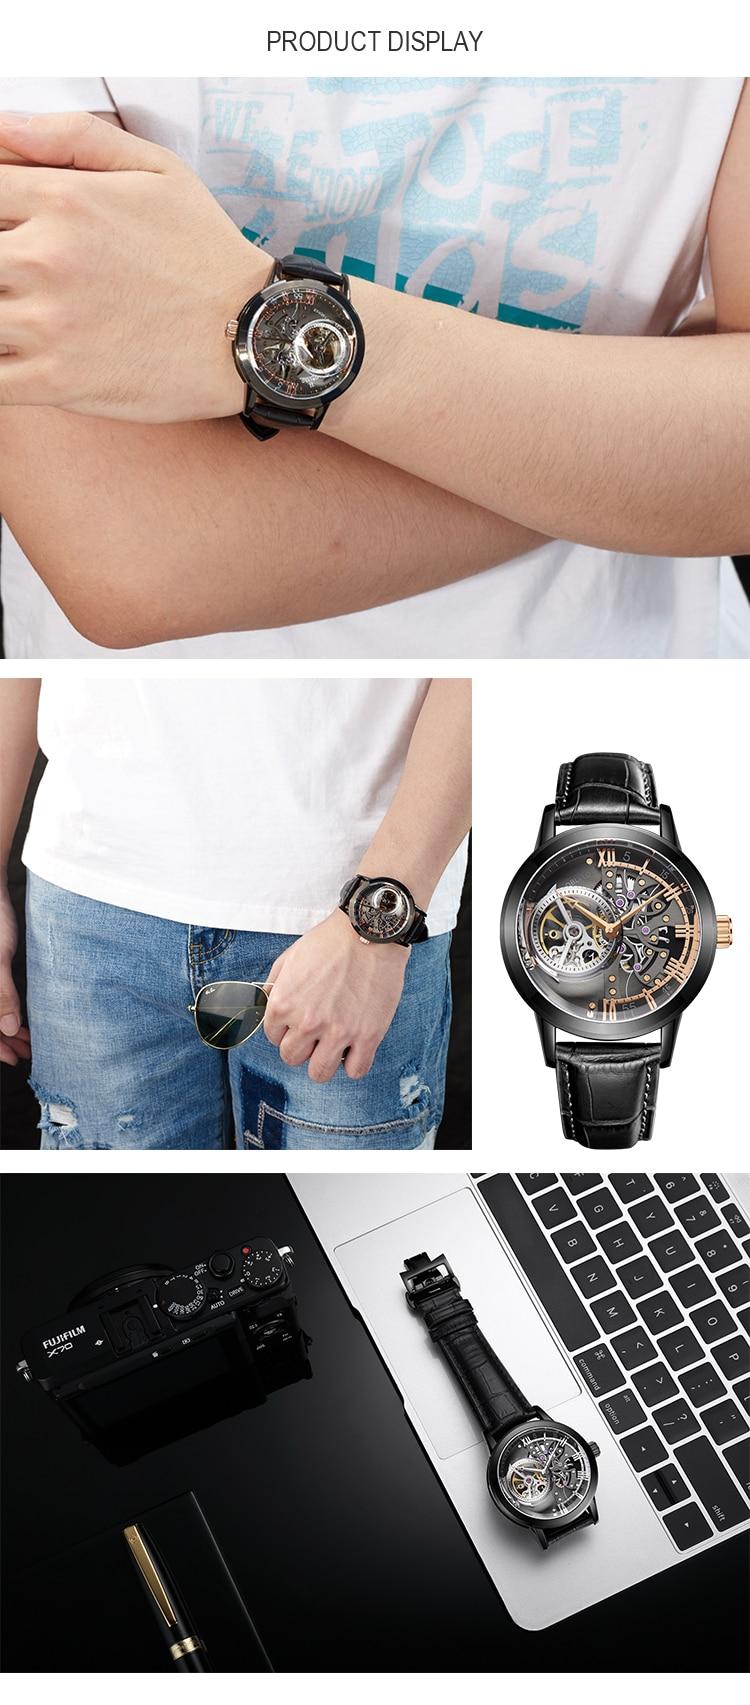 OBLVLO Casual Watches Mens Skeleton Dial Calfskin Leather Band Rose Gold Watches Automatic Watches for Men Montre Homme VM 1